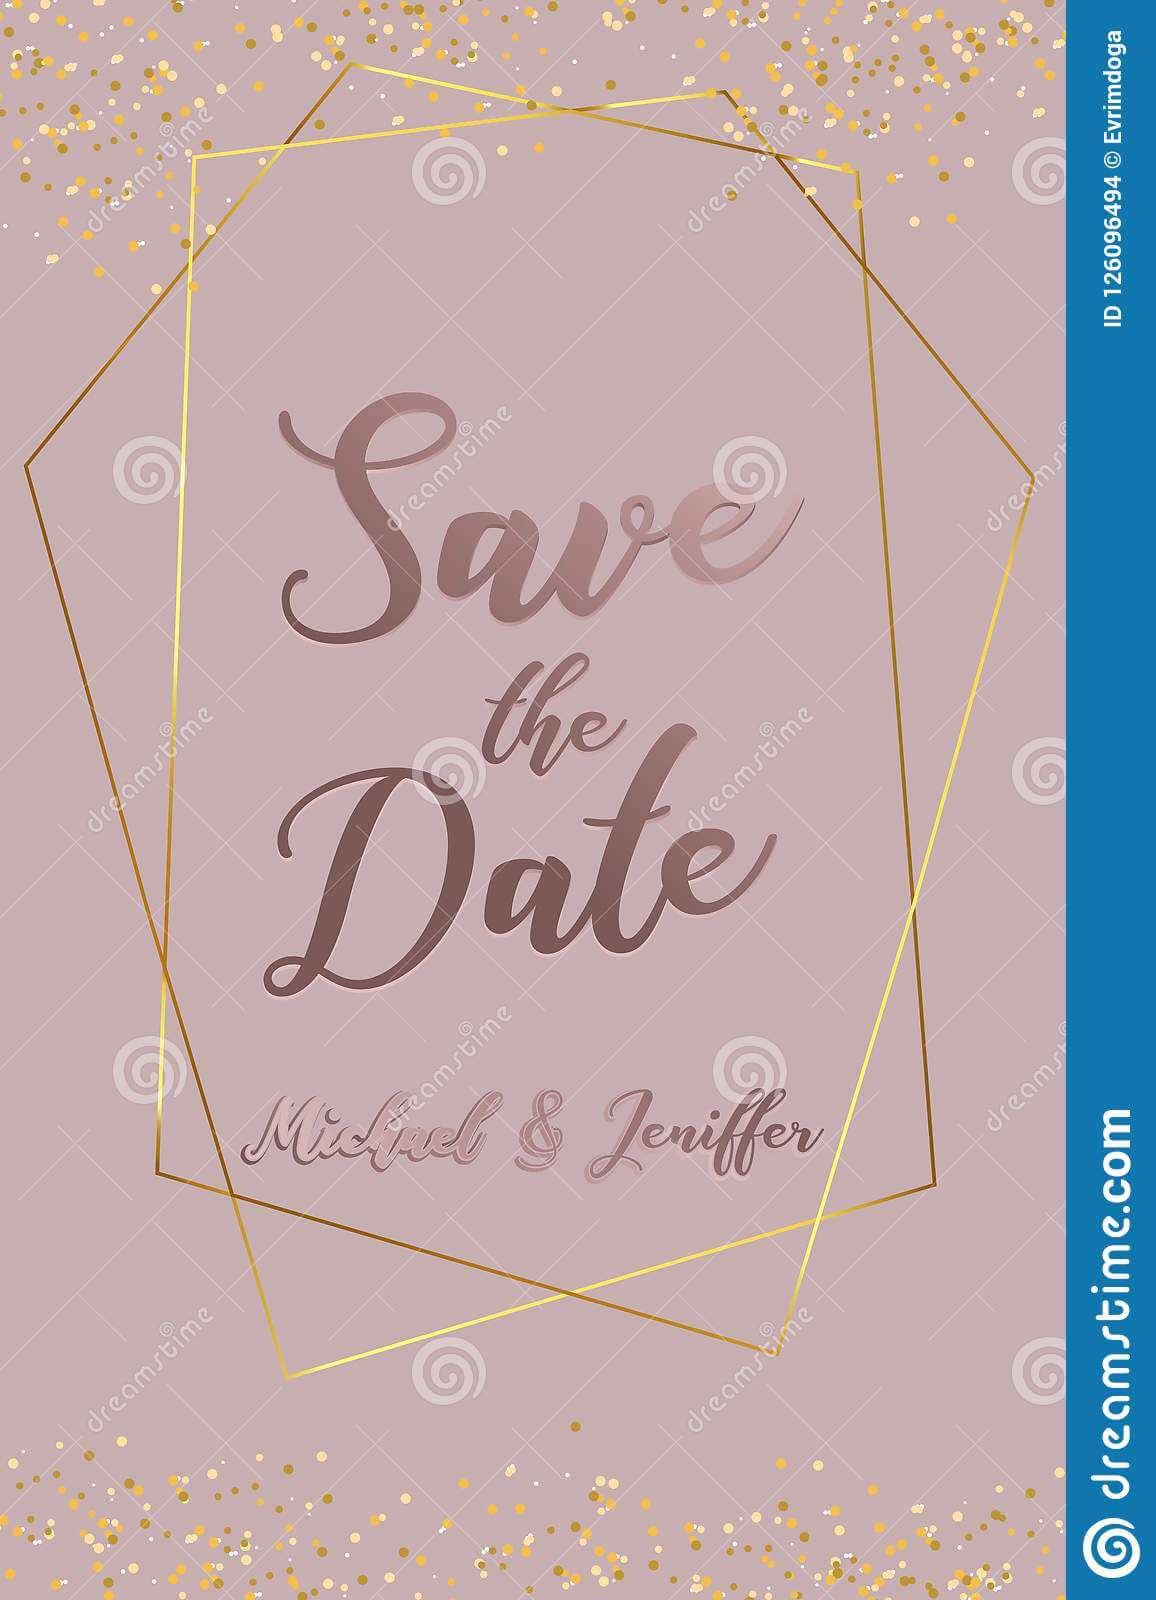 Wedding Invitation, Thank You Card, Save The Date Card With Thank You Card Template For Baby Shower